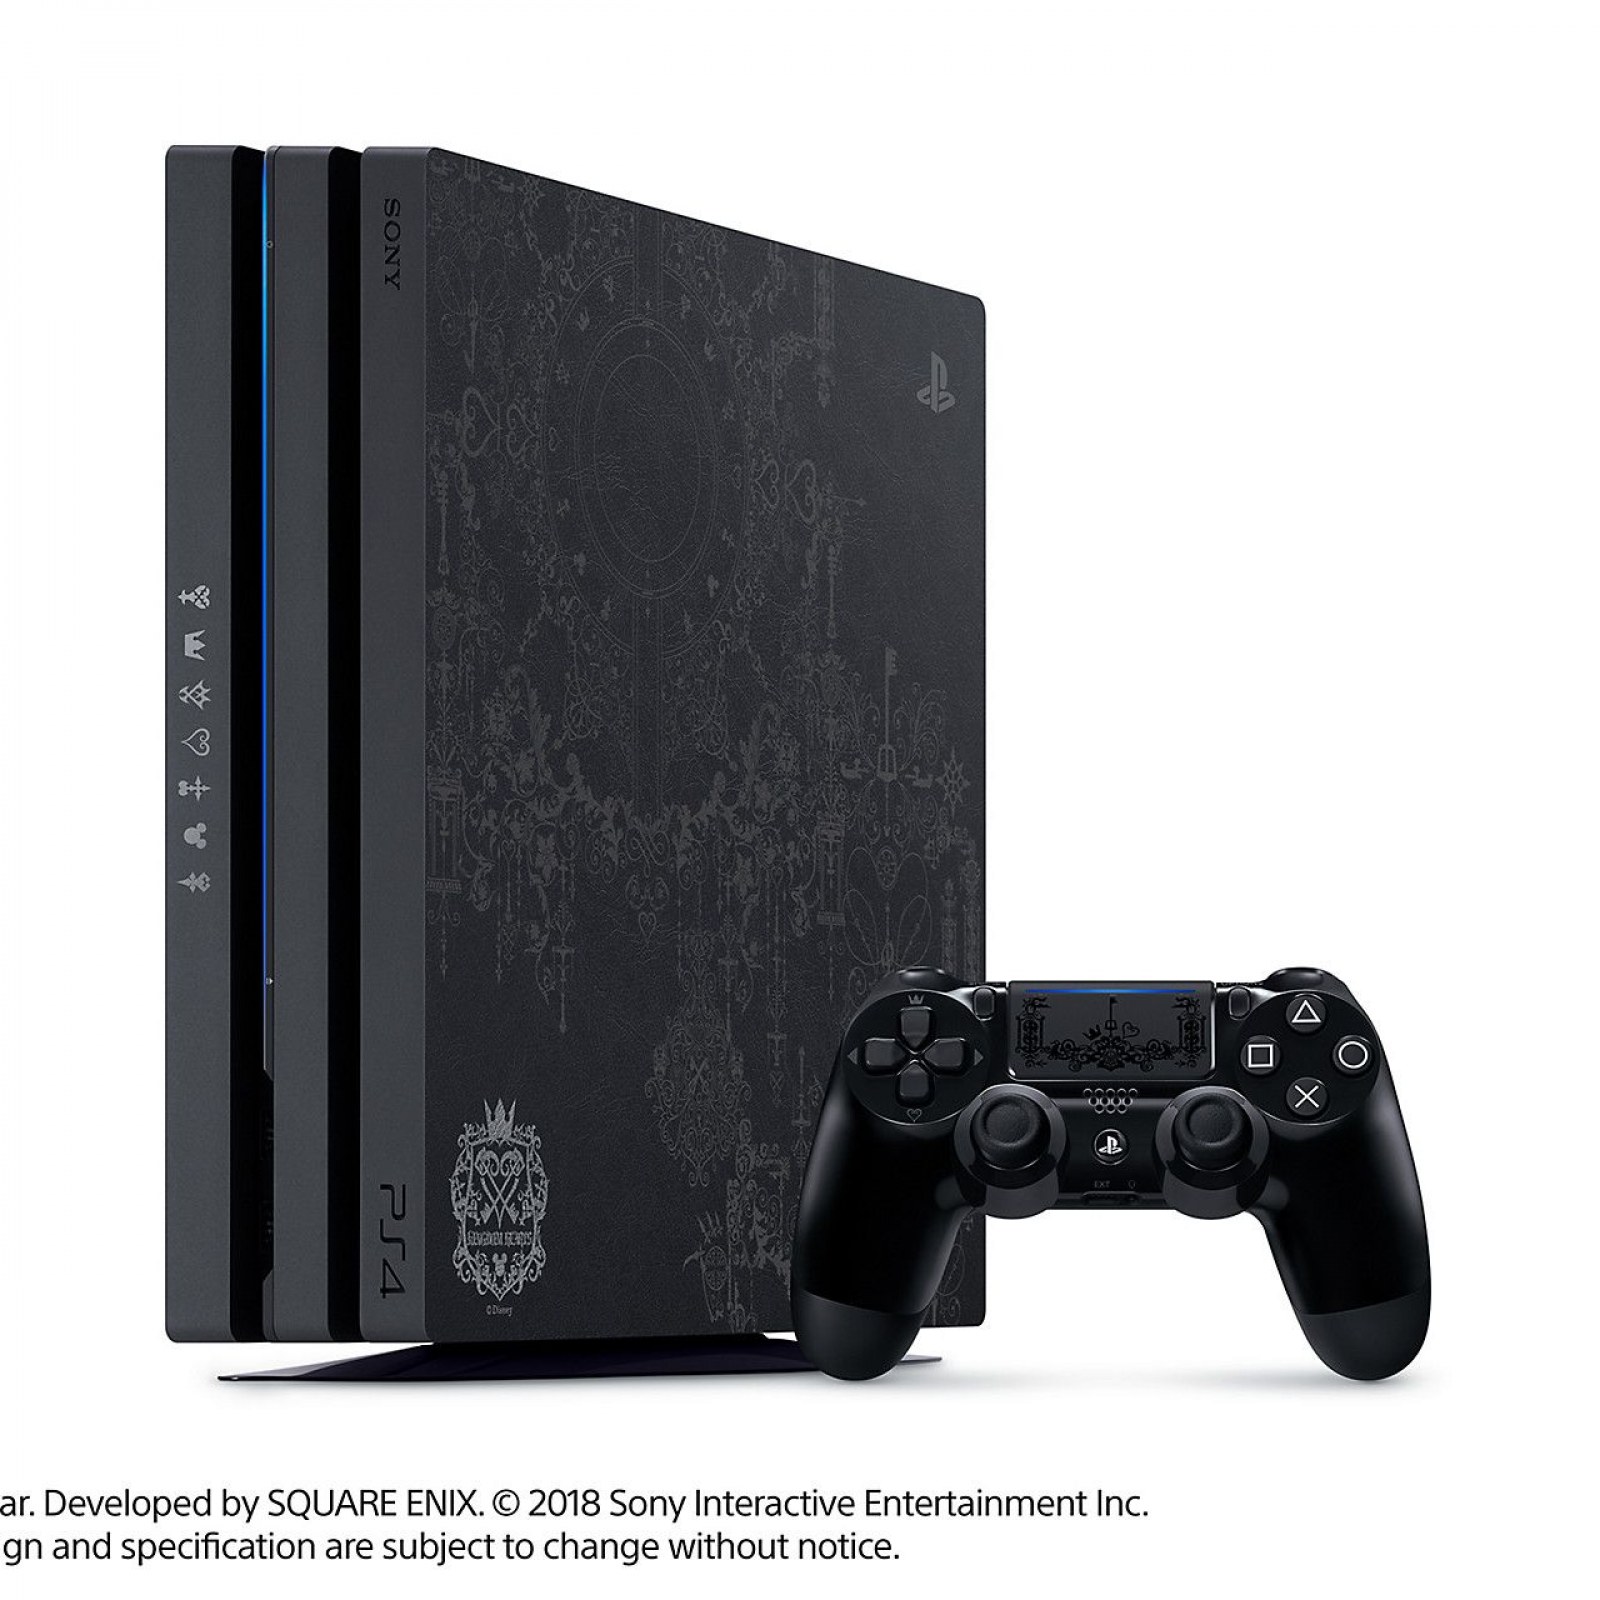 Kingdom Hearts 3' PS4 Pro Bundle Pre-Orders Live Where Buy the Limited-Edition Console